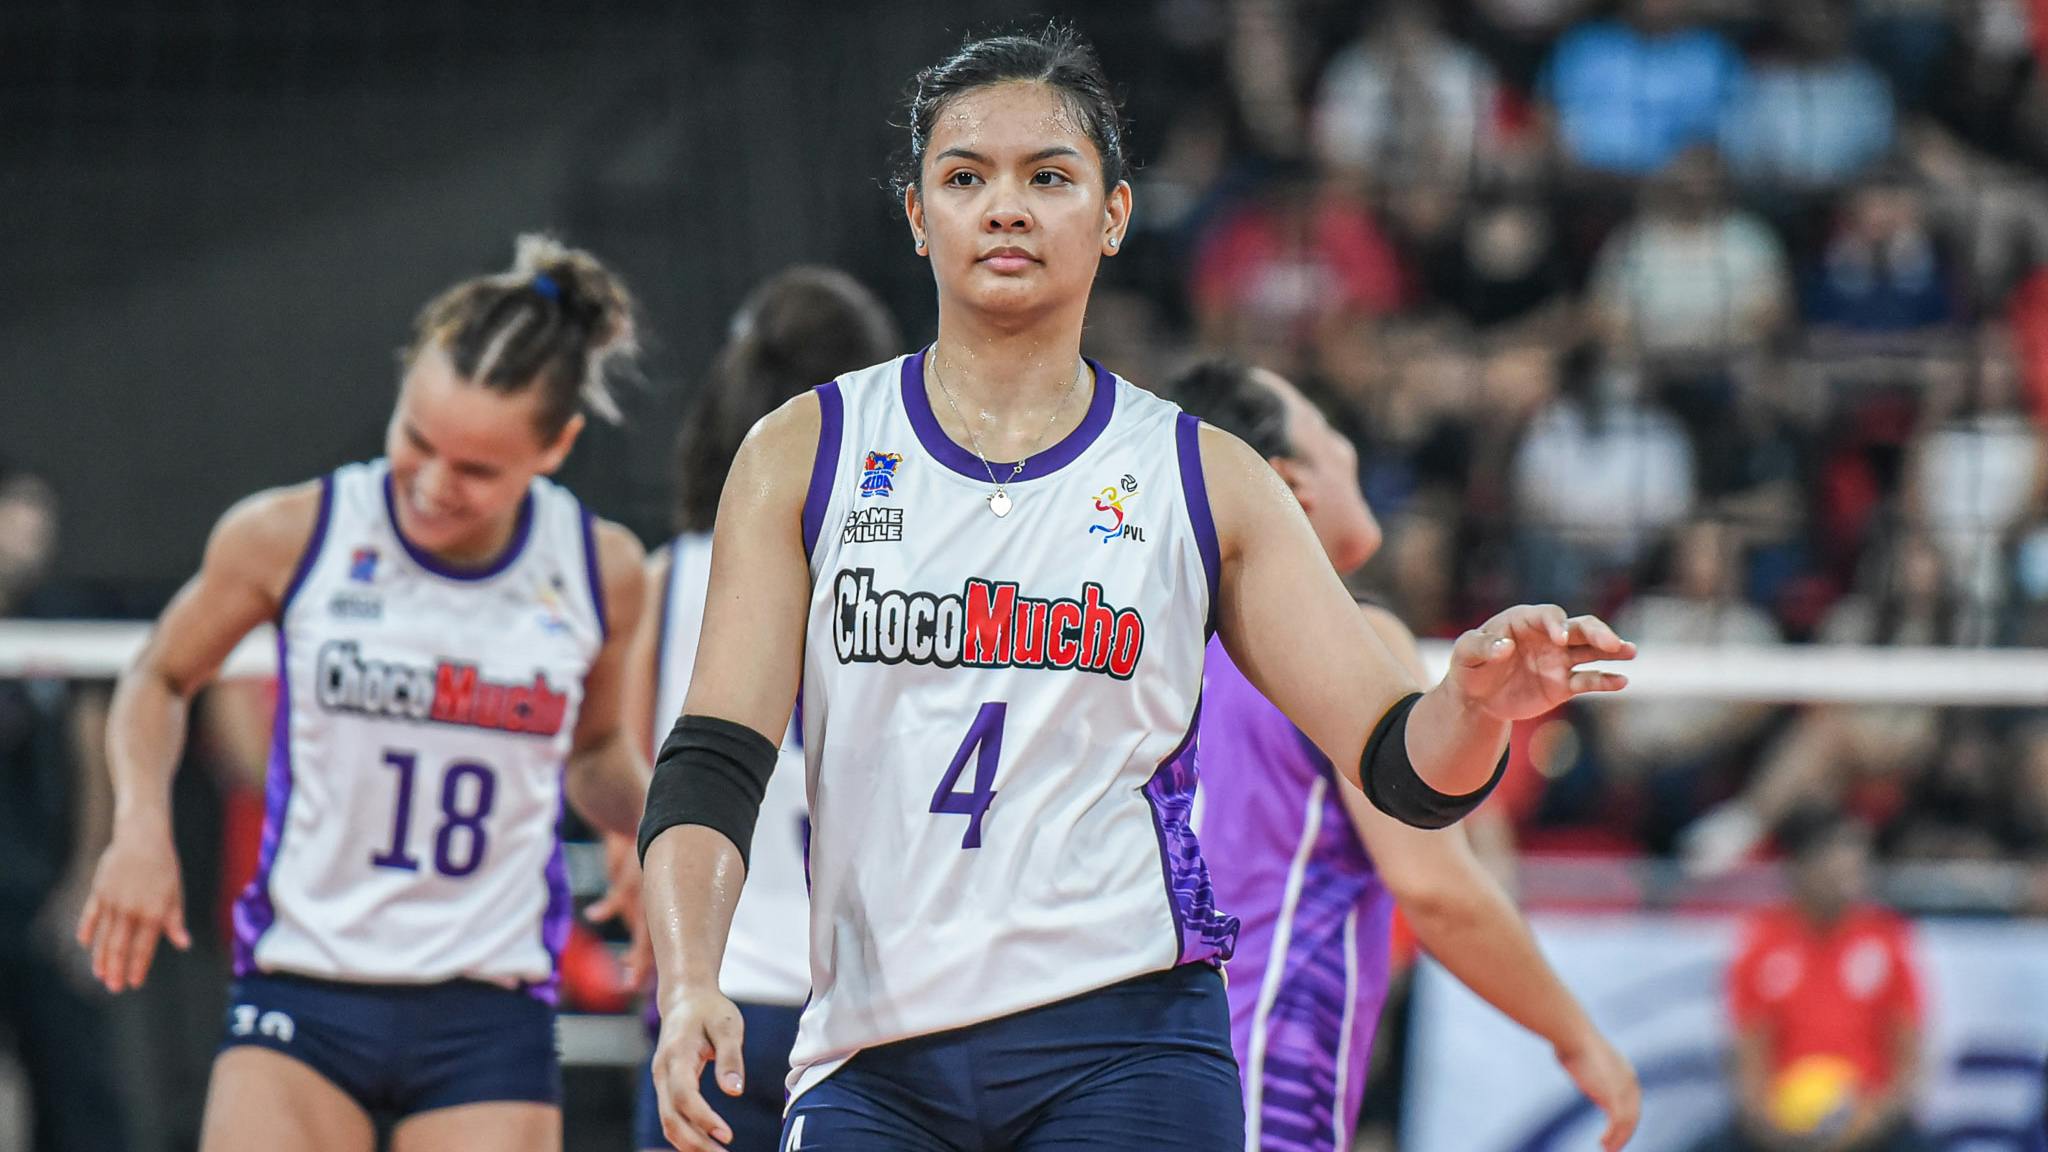 Caitlin Viray flies high as Choco Mucho dispatches Chery Tiggo to end PVL Invitational on high note